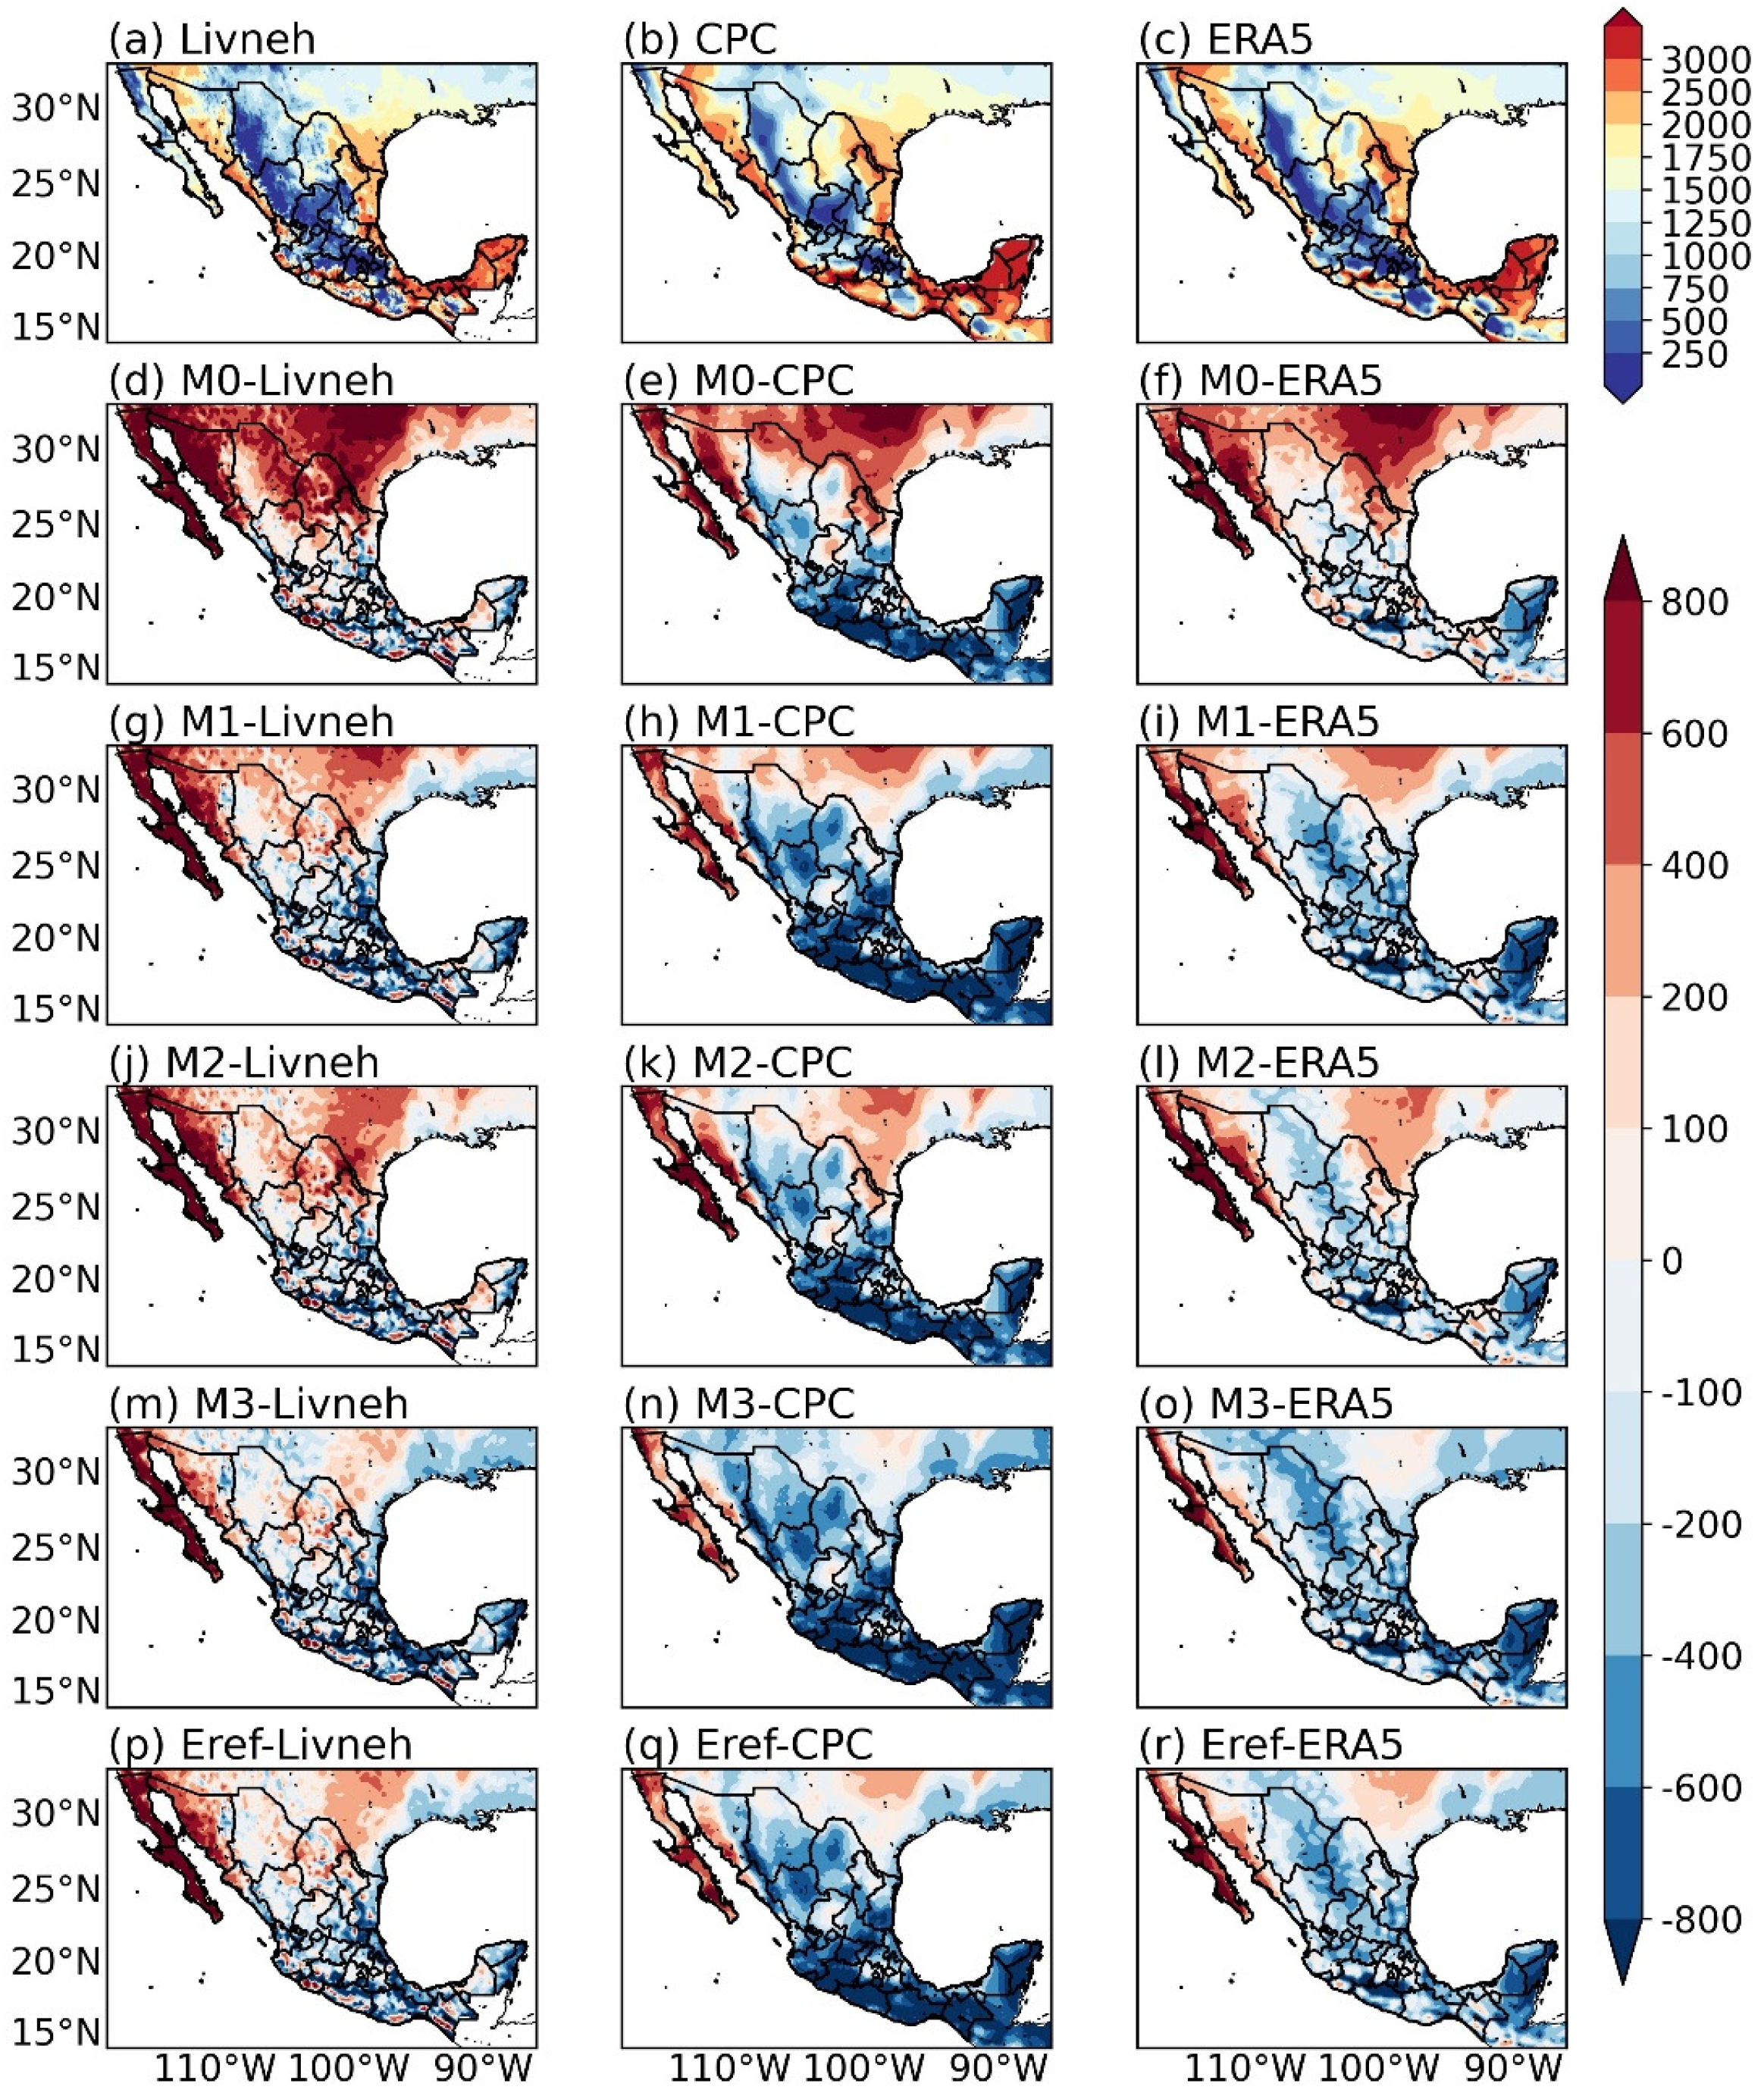 Atmosphere | Free Full-Text | Analysis of Cooling and Heating Degree Days  over Mexico in Present and Future Climate